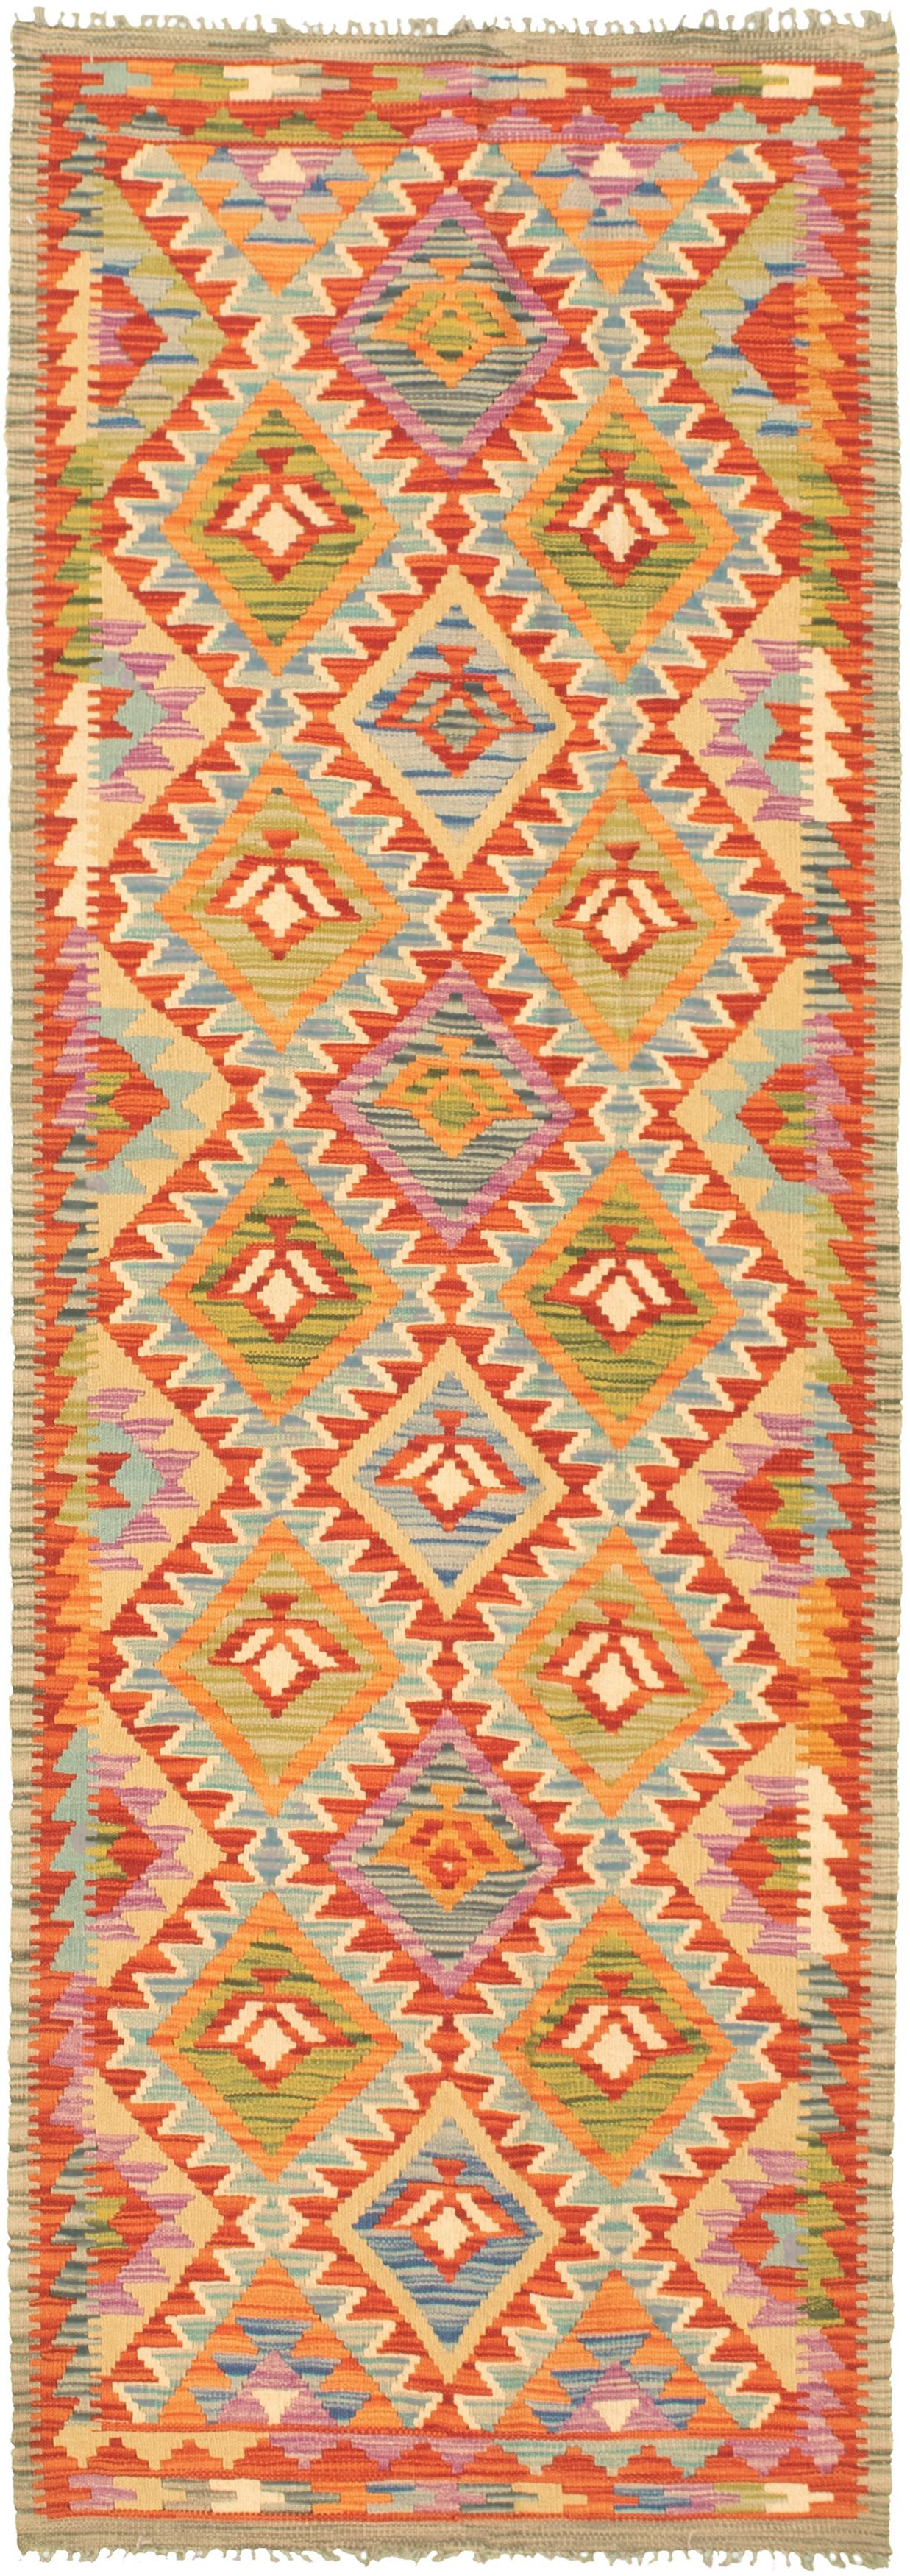 Hand woven Bold and Colorful  Red Wool Kilim 2'8" x 8'1" Size: 2'8" x 8'1"  